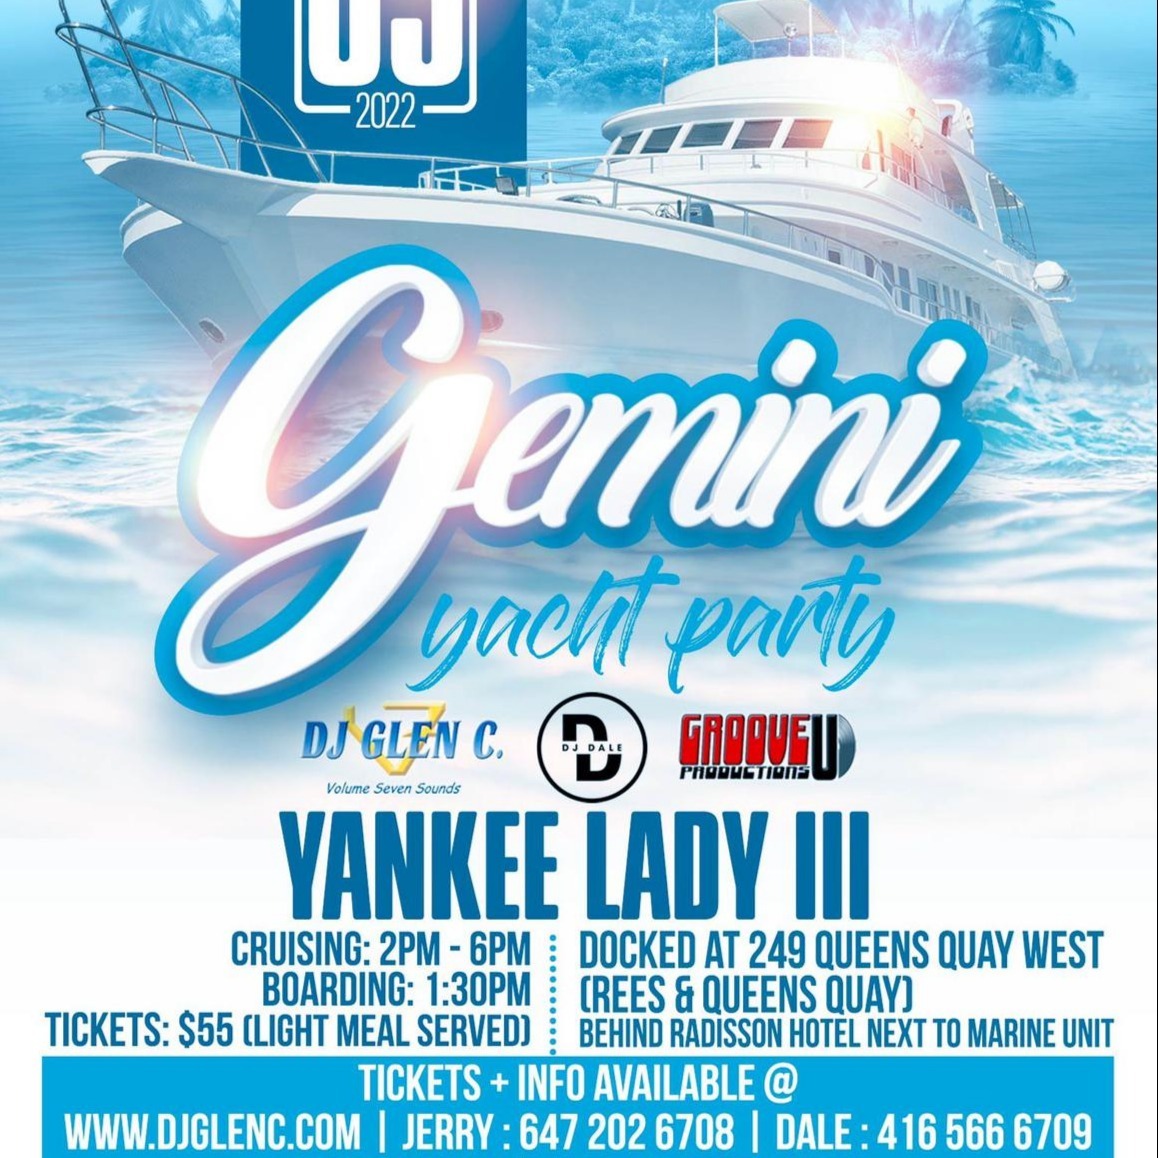 GEMINI YACHT PARTY - FOR THE LOVE OF MUSIC 2022